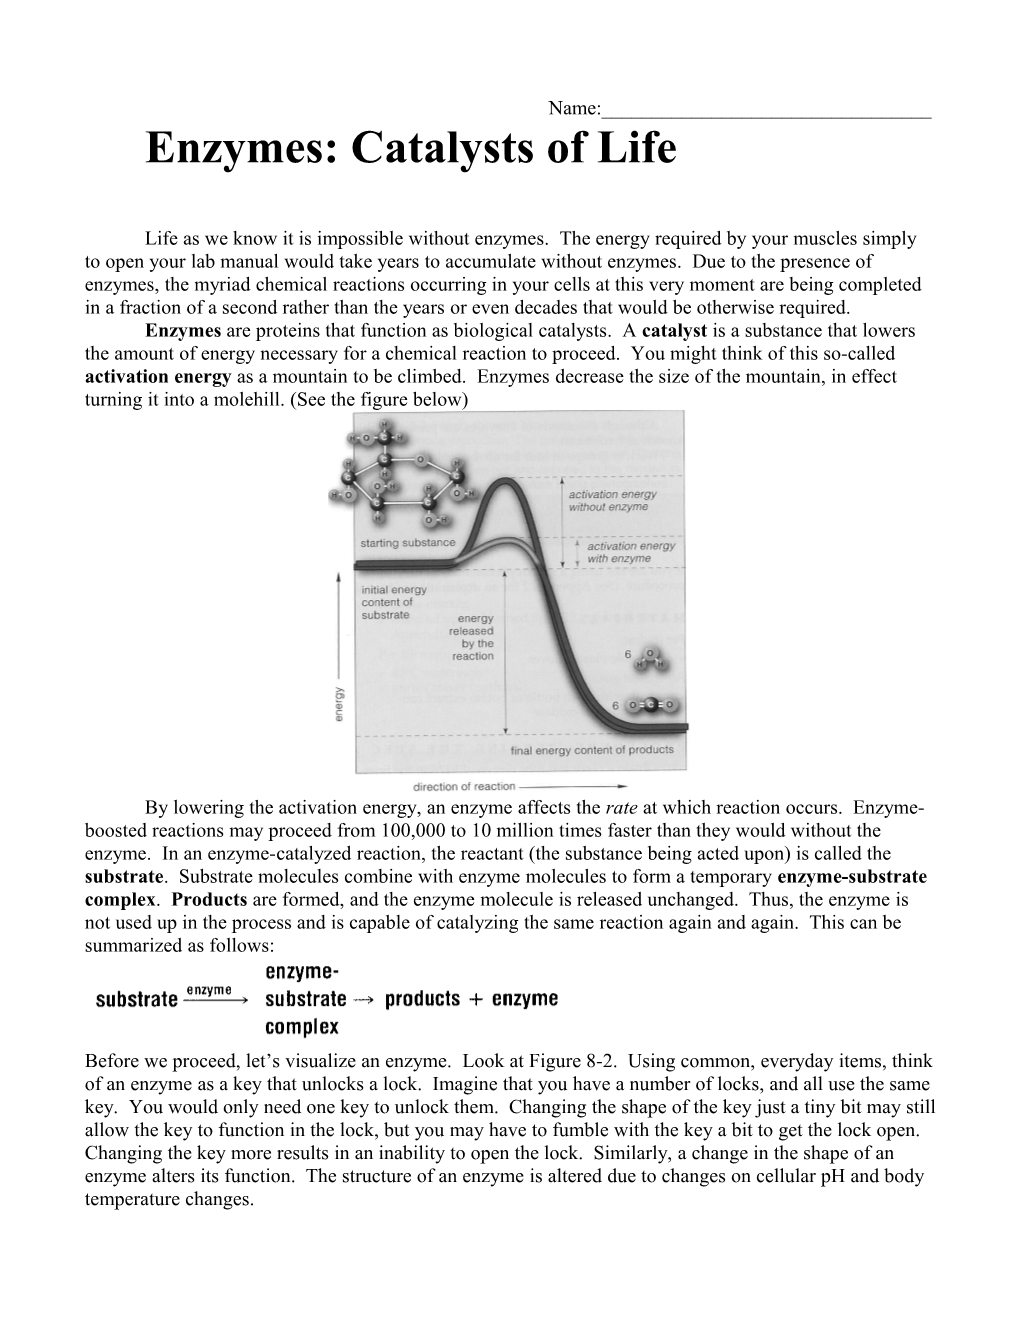 Enzymes: Catalysts of Life